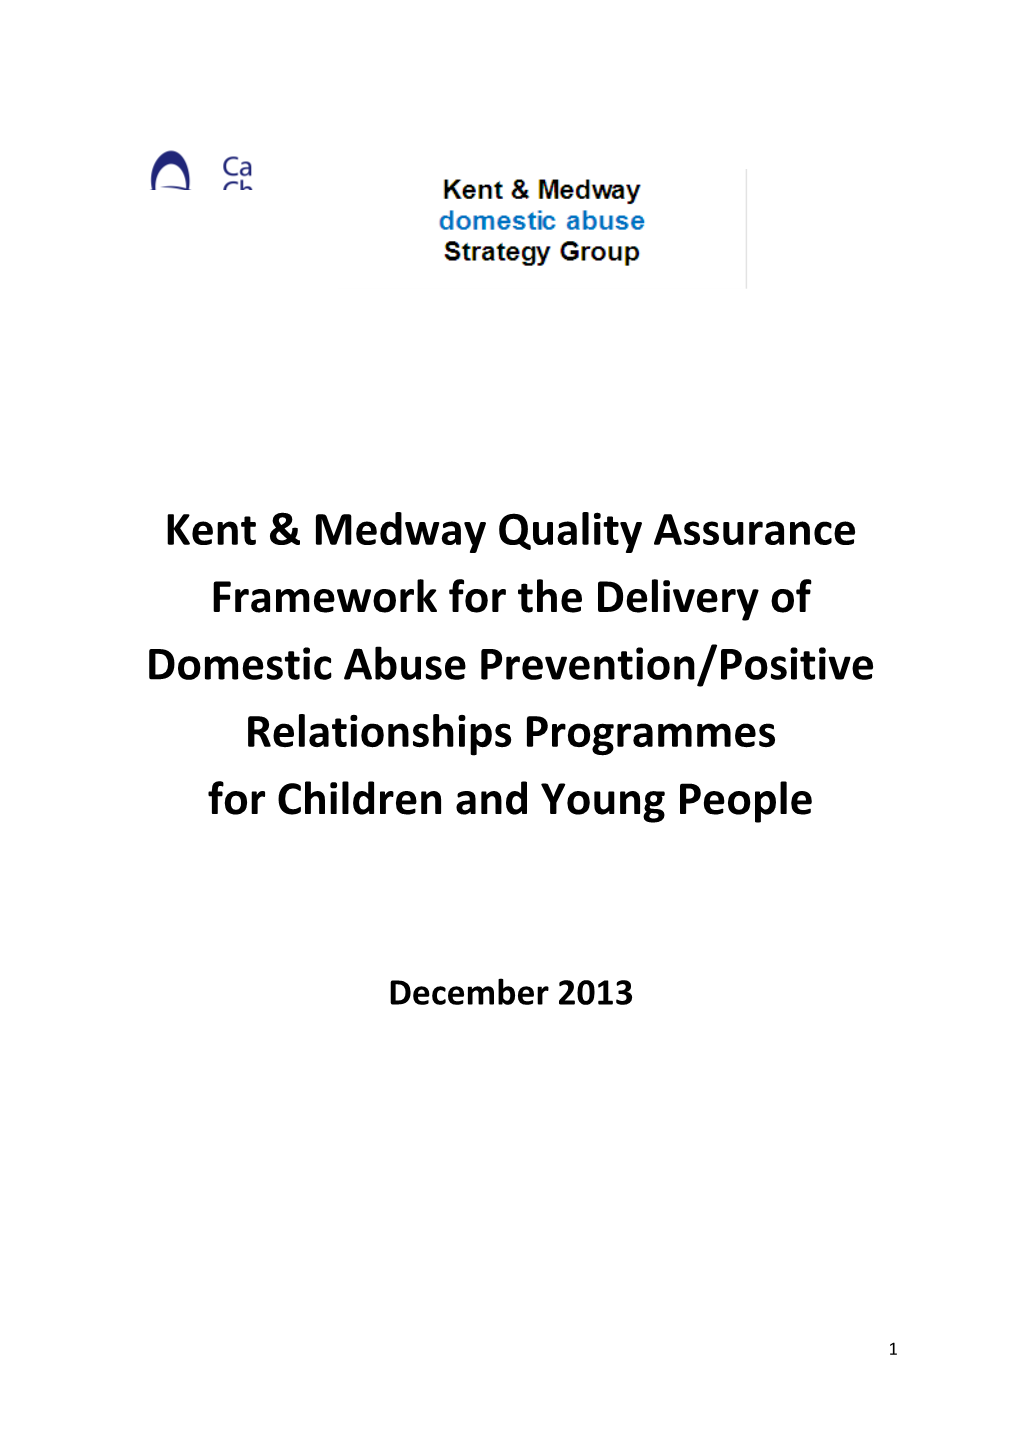 Kent & Medway Quality Assurance Framework for the Delivery of Domestic Abuse